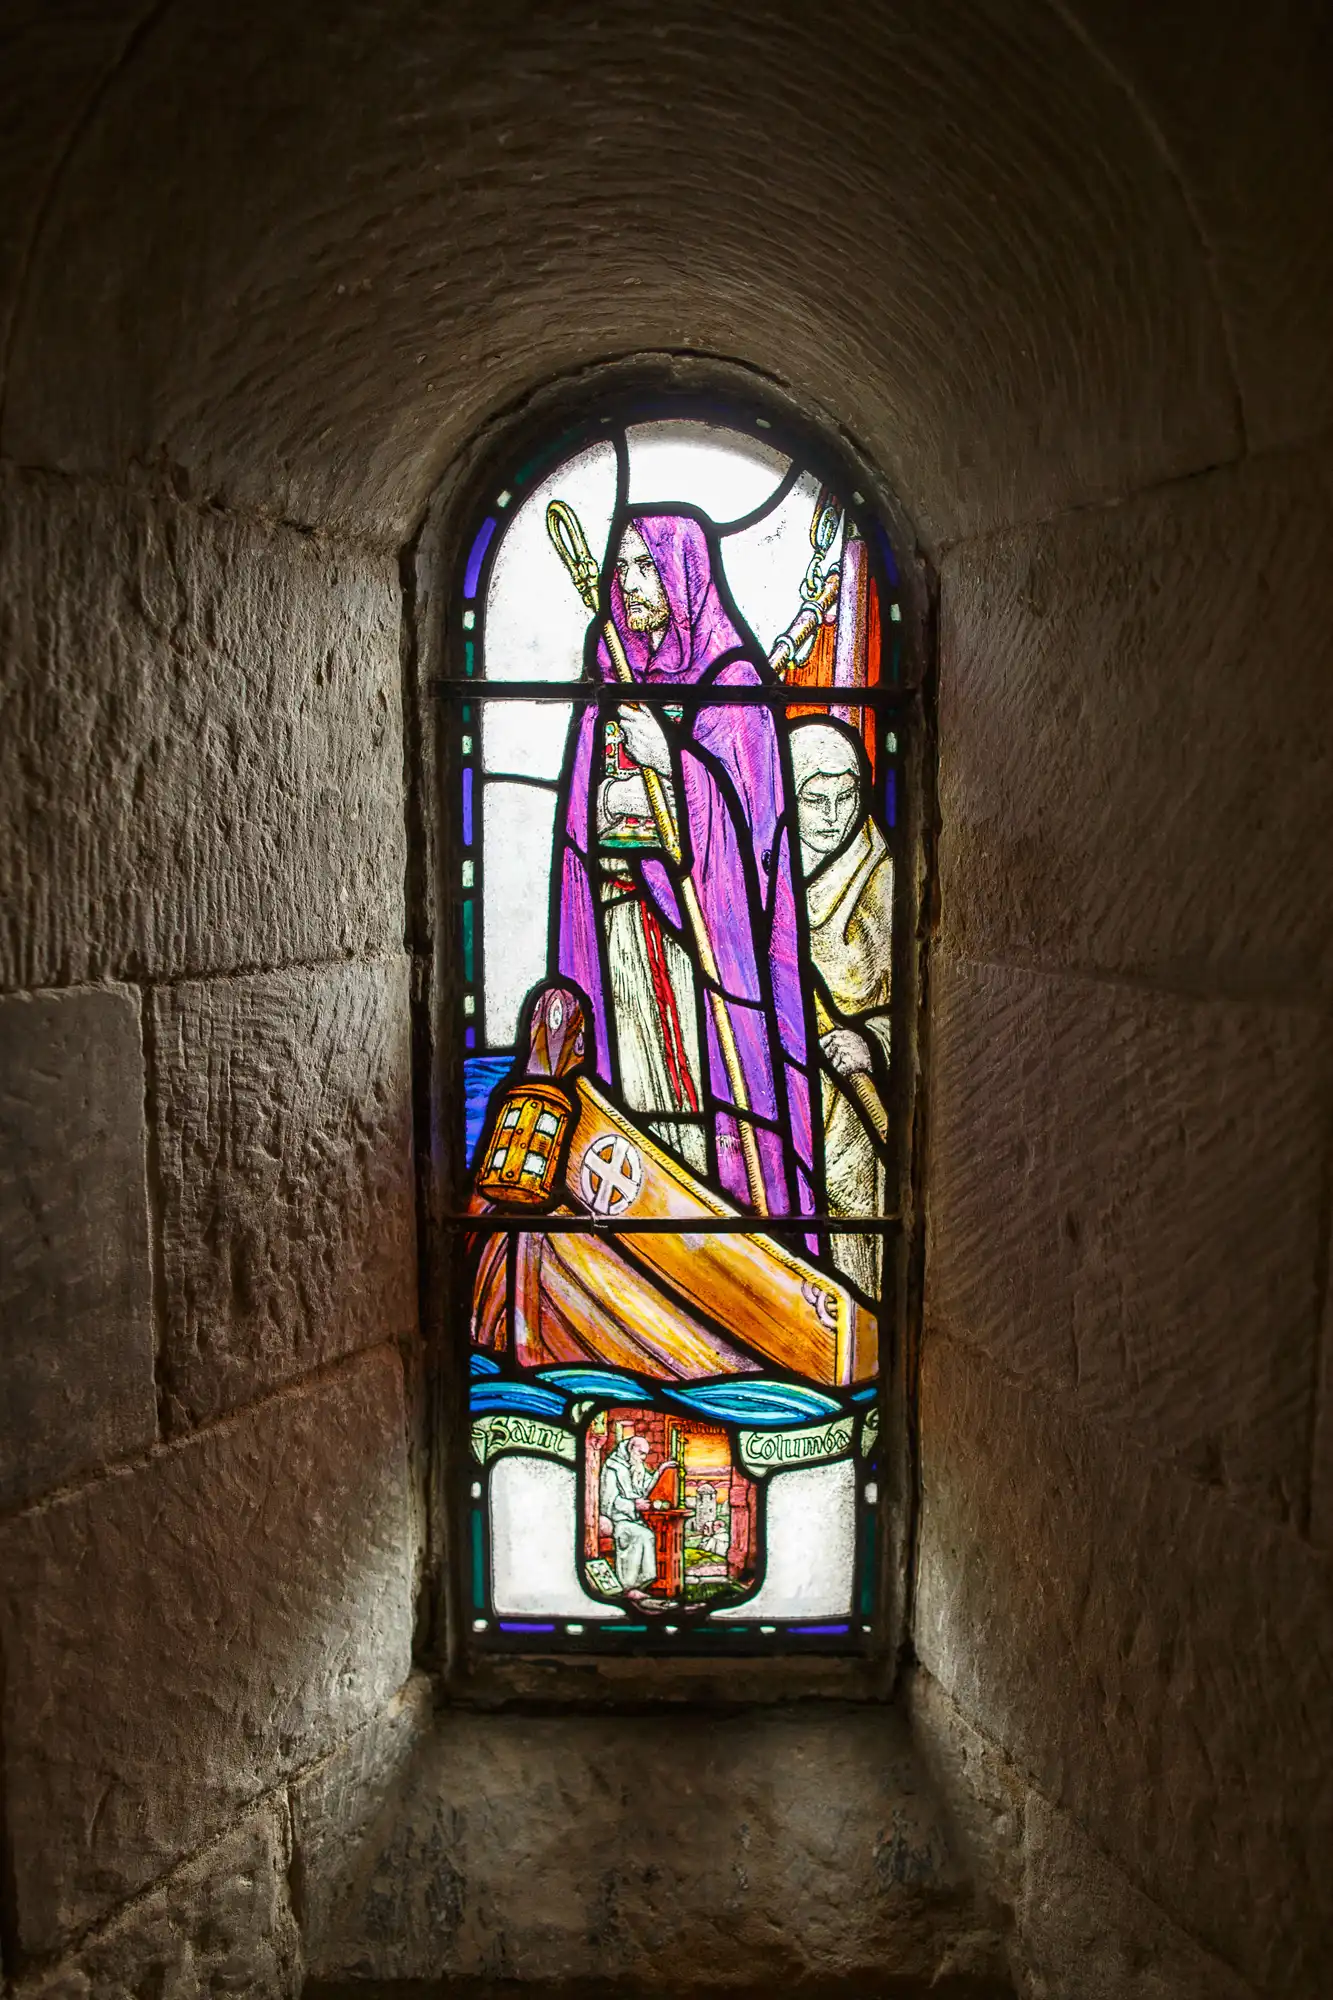 Stained glass window depicting a bishop in purple robes holding a staff, with another figure in the background, set in a stone arch.